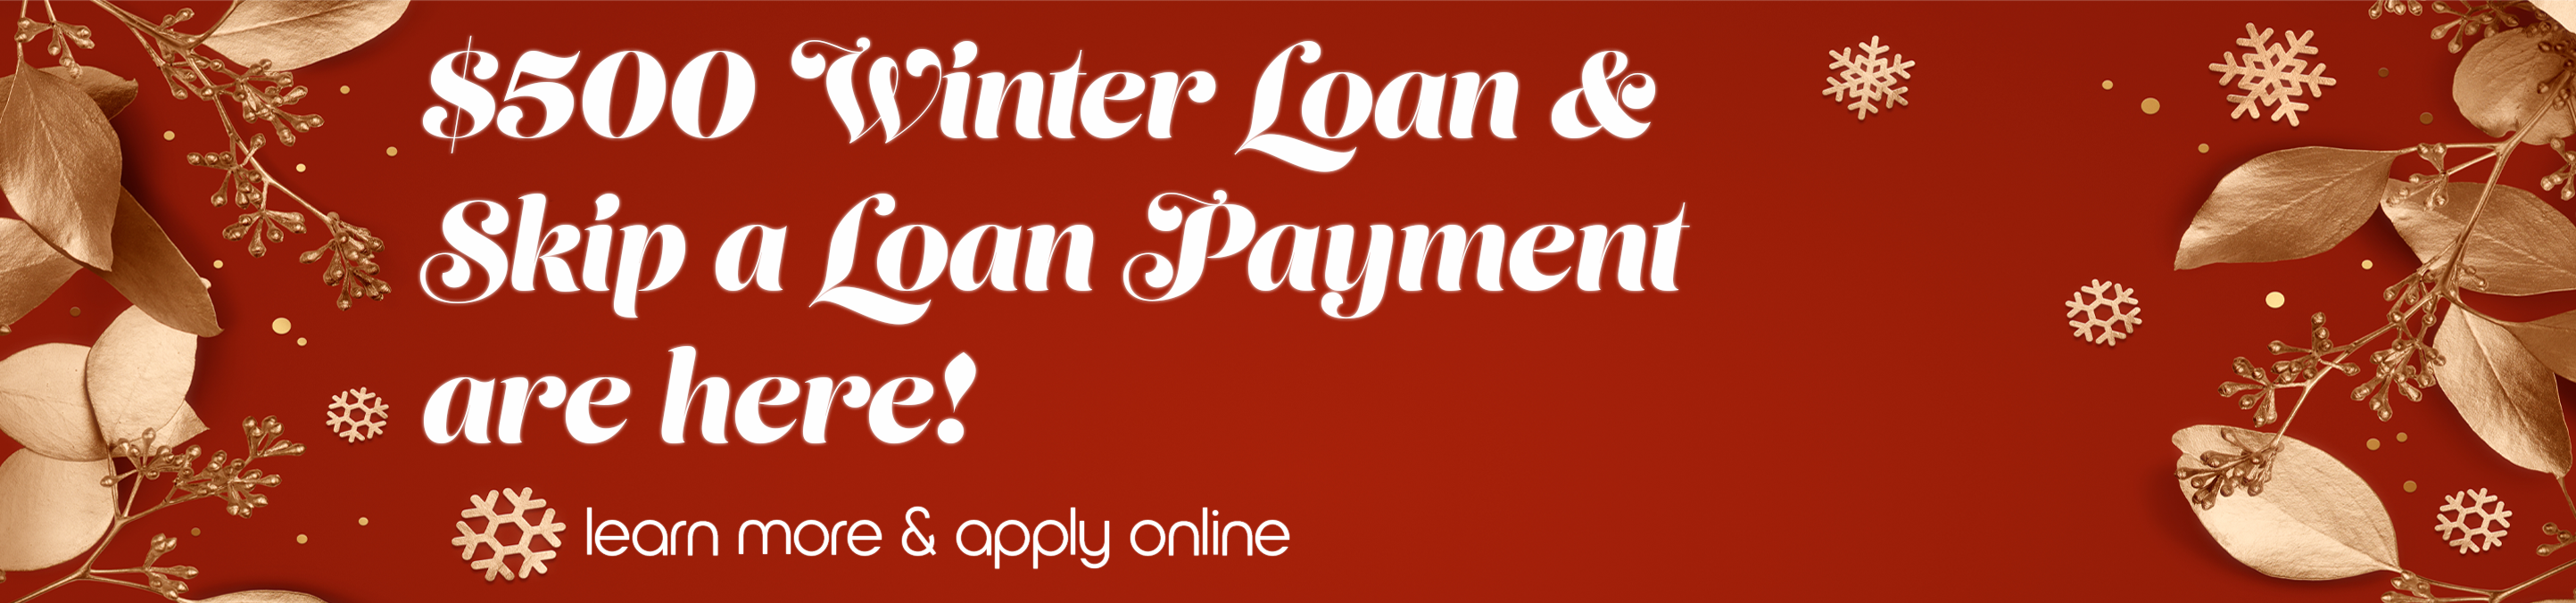 $500 winter loan and skip a loan payment are here! Learn more and apply online